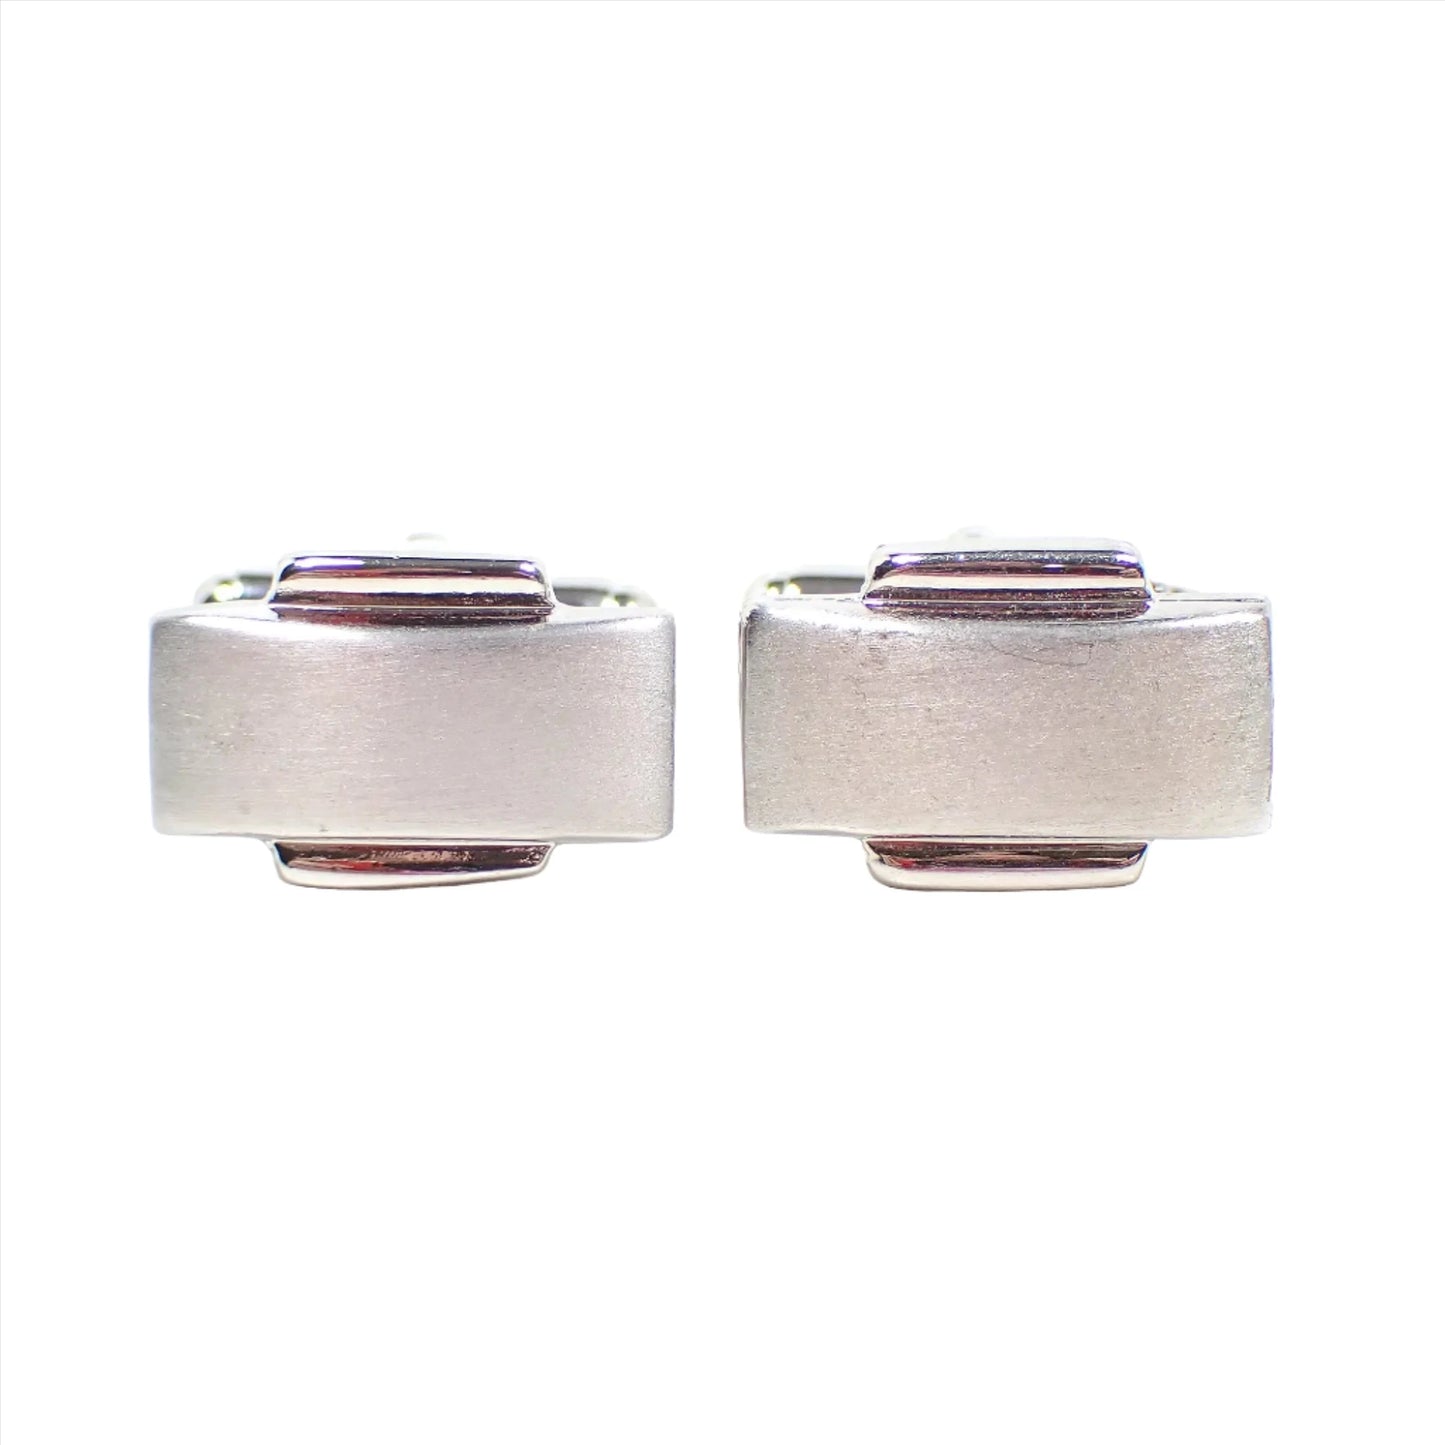 Front view of the retro vintage Modernist style cufflinks. The metal is silver tone in color. There are long rectangles that have a matte metal appearance with a shiny metal bar area on the top and bottom middle. 